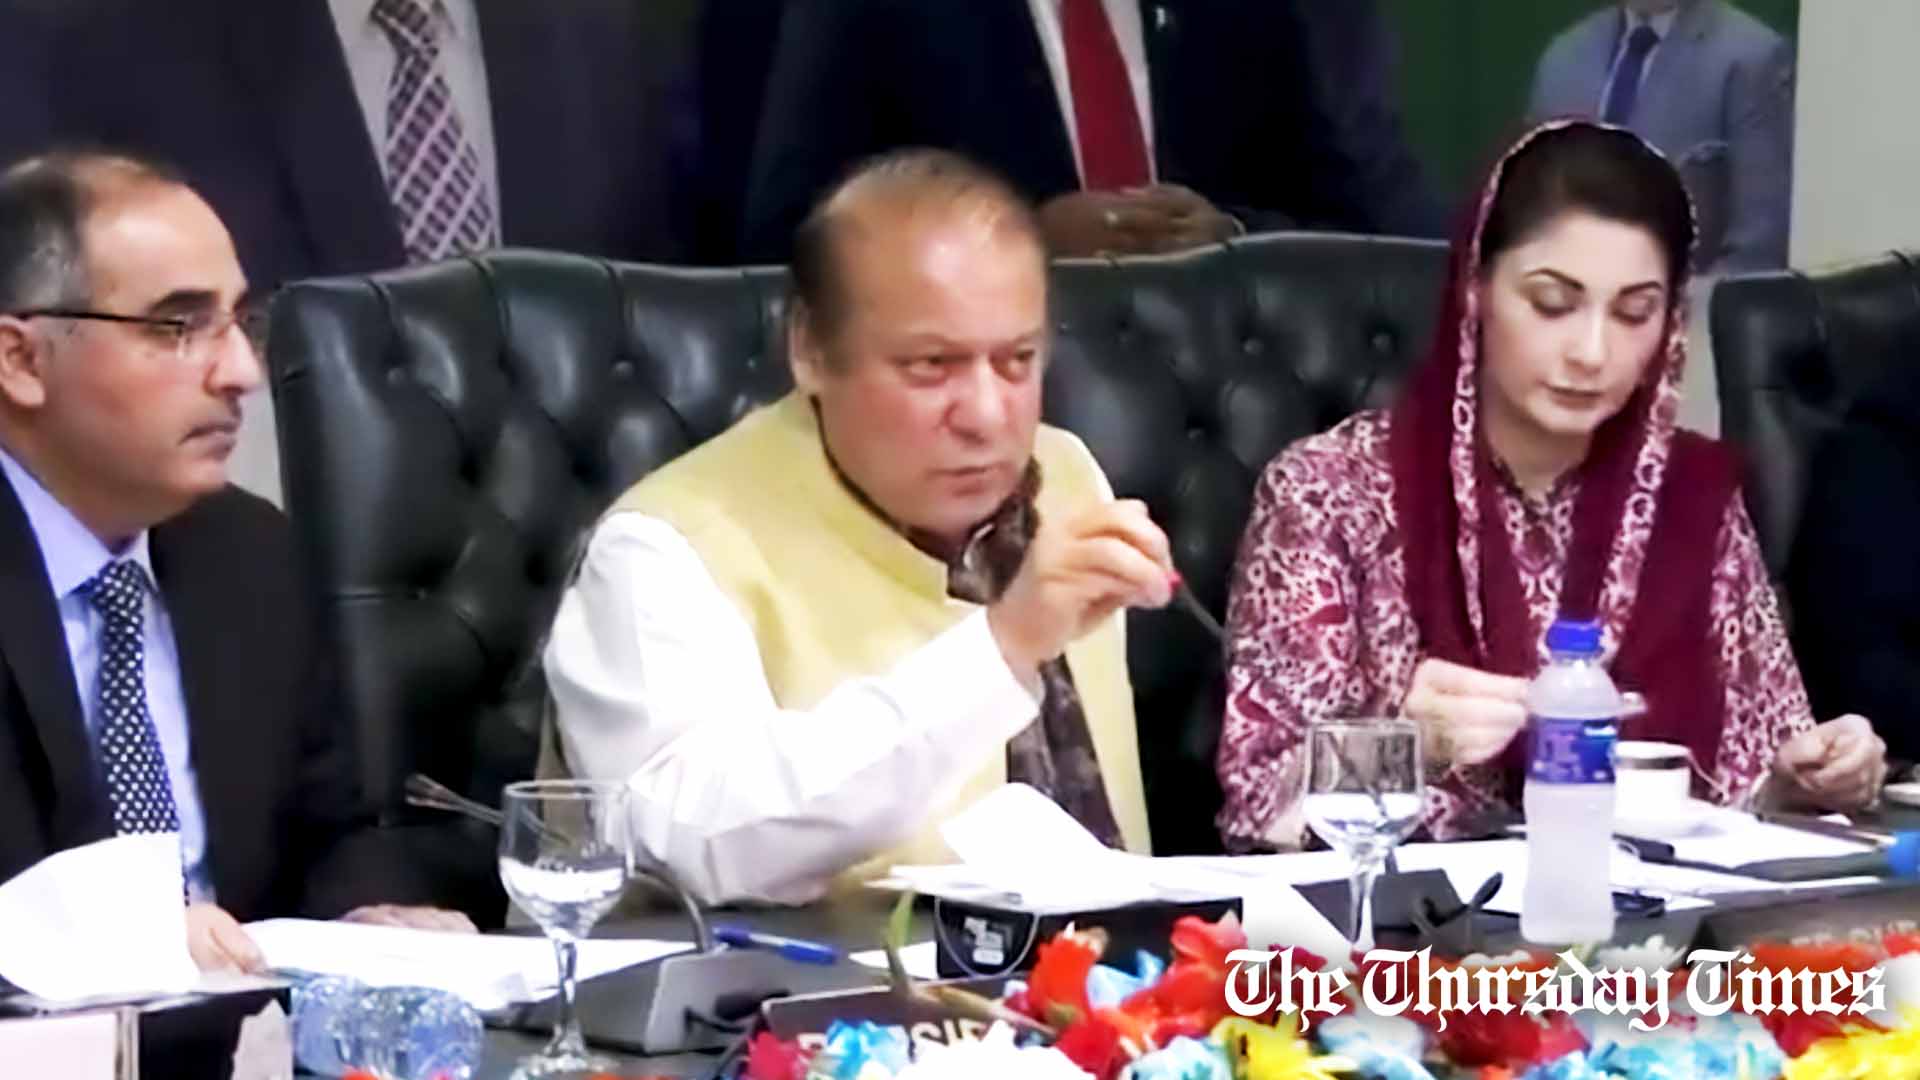 A file photo is shown of PML(N) supremo and former prime minister Nawaz Sharif (C) and PML(N) senior vice president Maryam Nawaz (R) with LCCI president Kashif Anwar (L) at the Lahore Chamber of Commerce and Industry on November 16, 2023. — FILE/THE THURSDAY TIMES